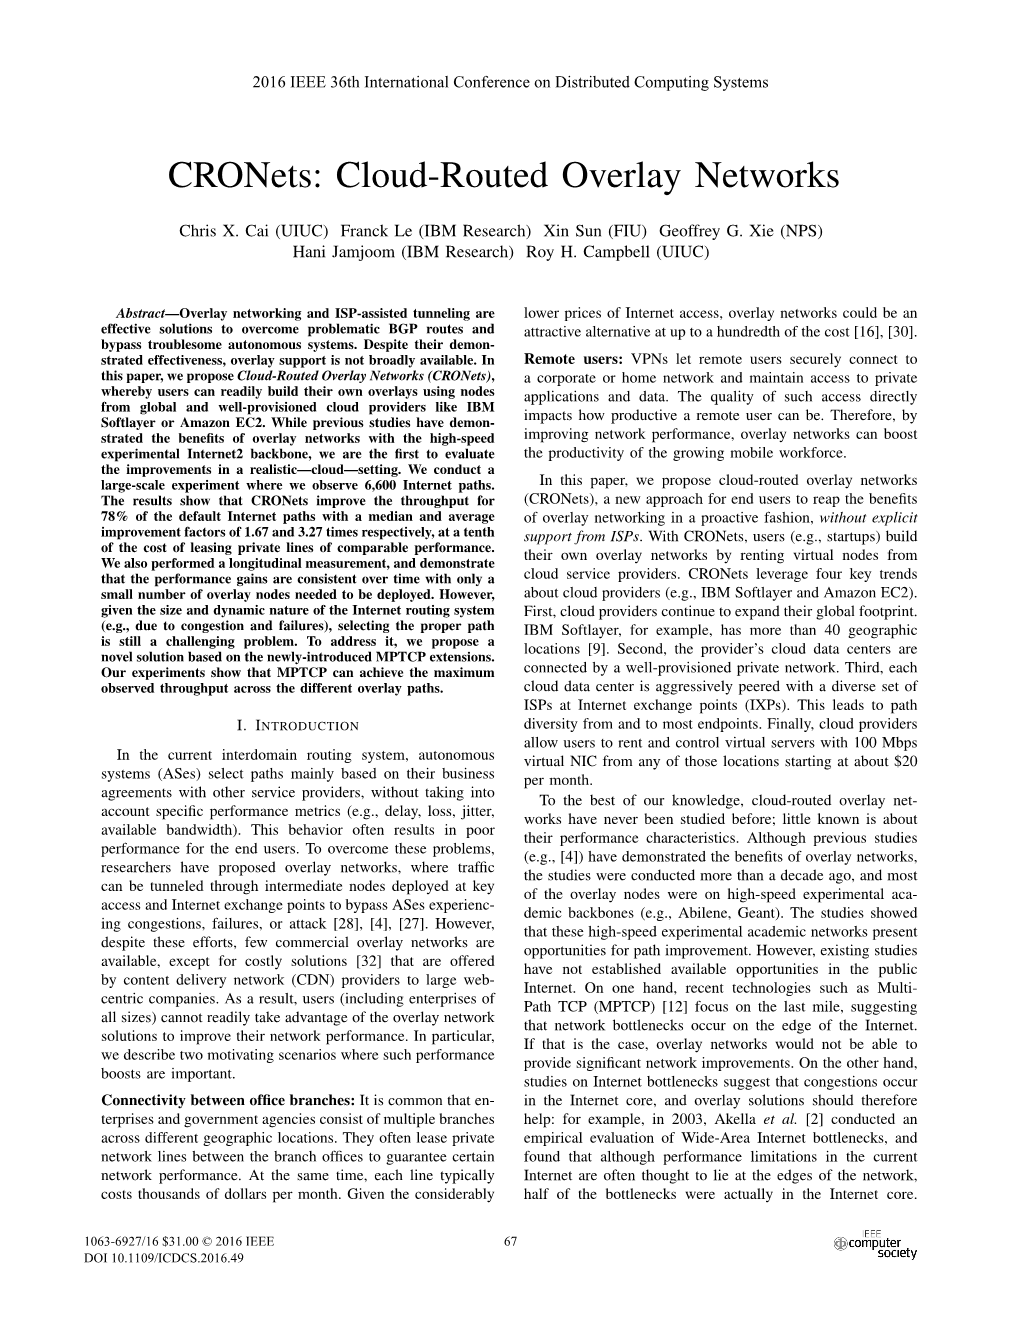 Cronets: Cloud-Routed Overlay Networks